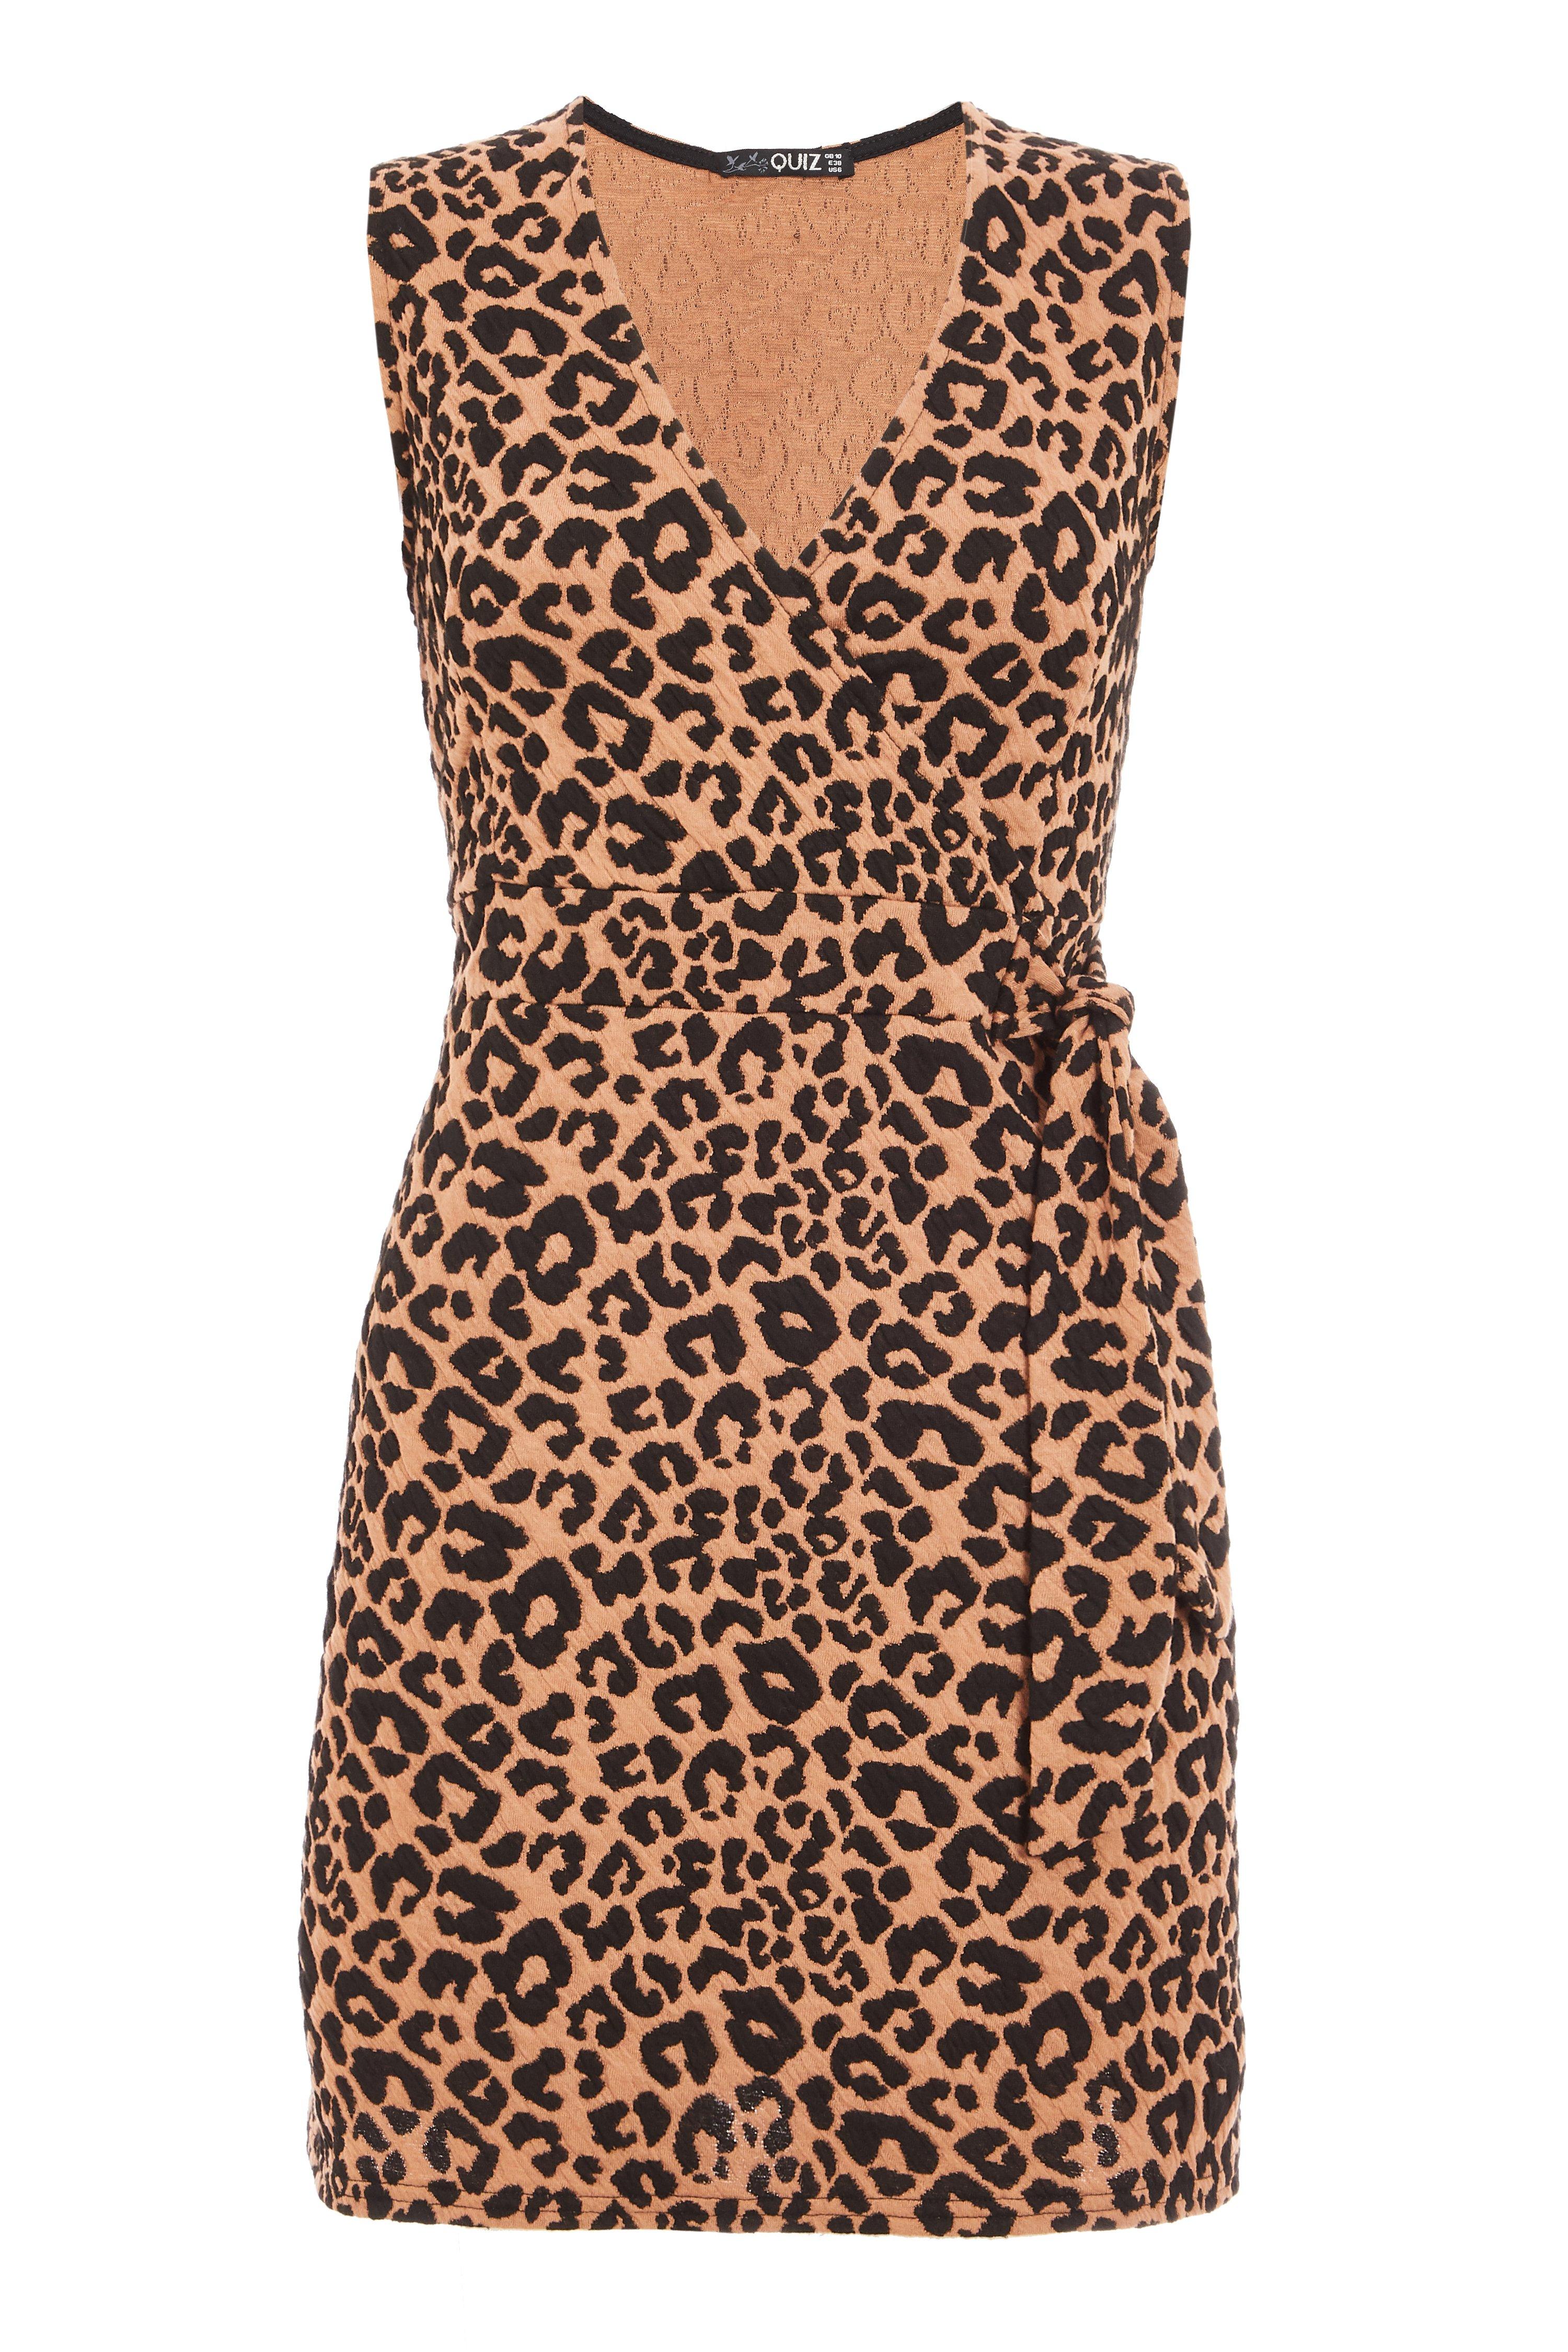 Brown and Black Knit Leopard Print Pinafore - Quiz Clothing